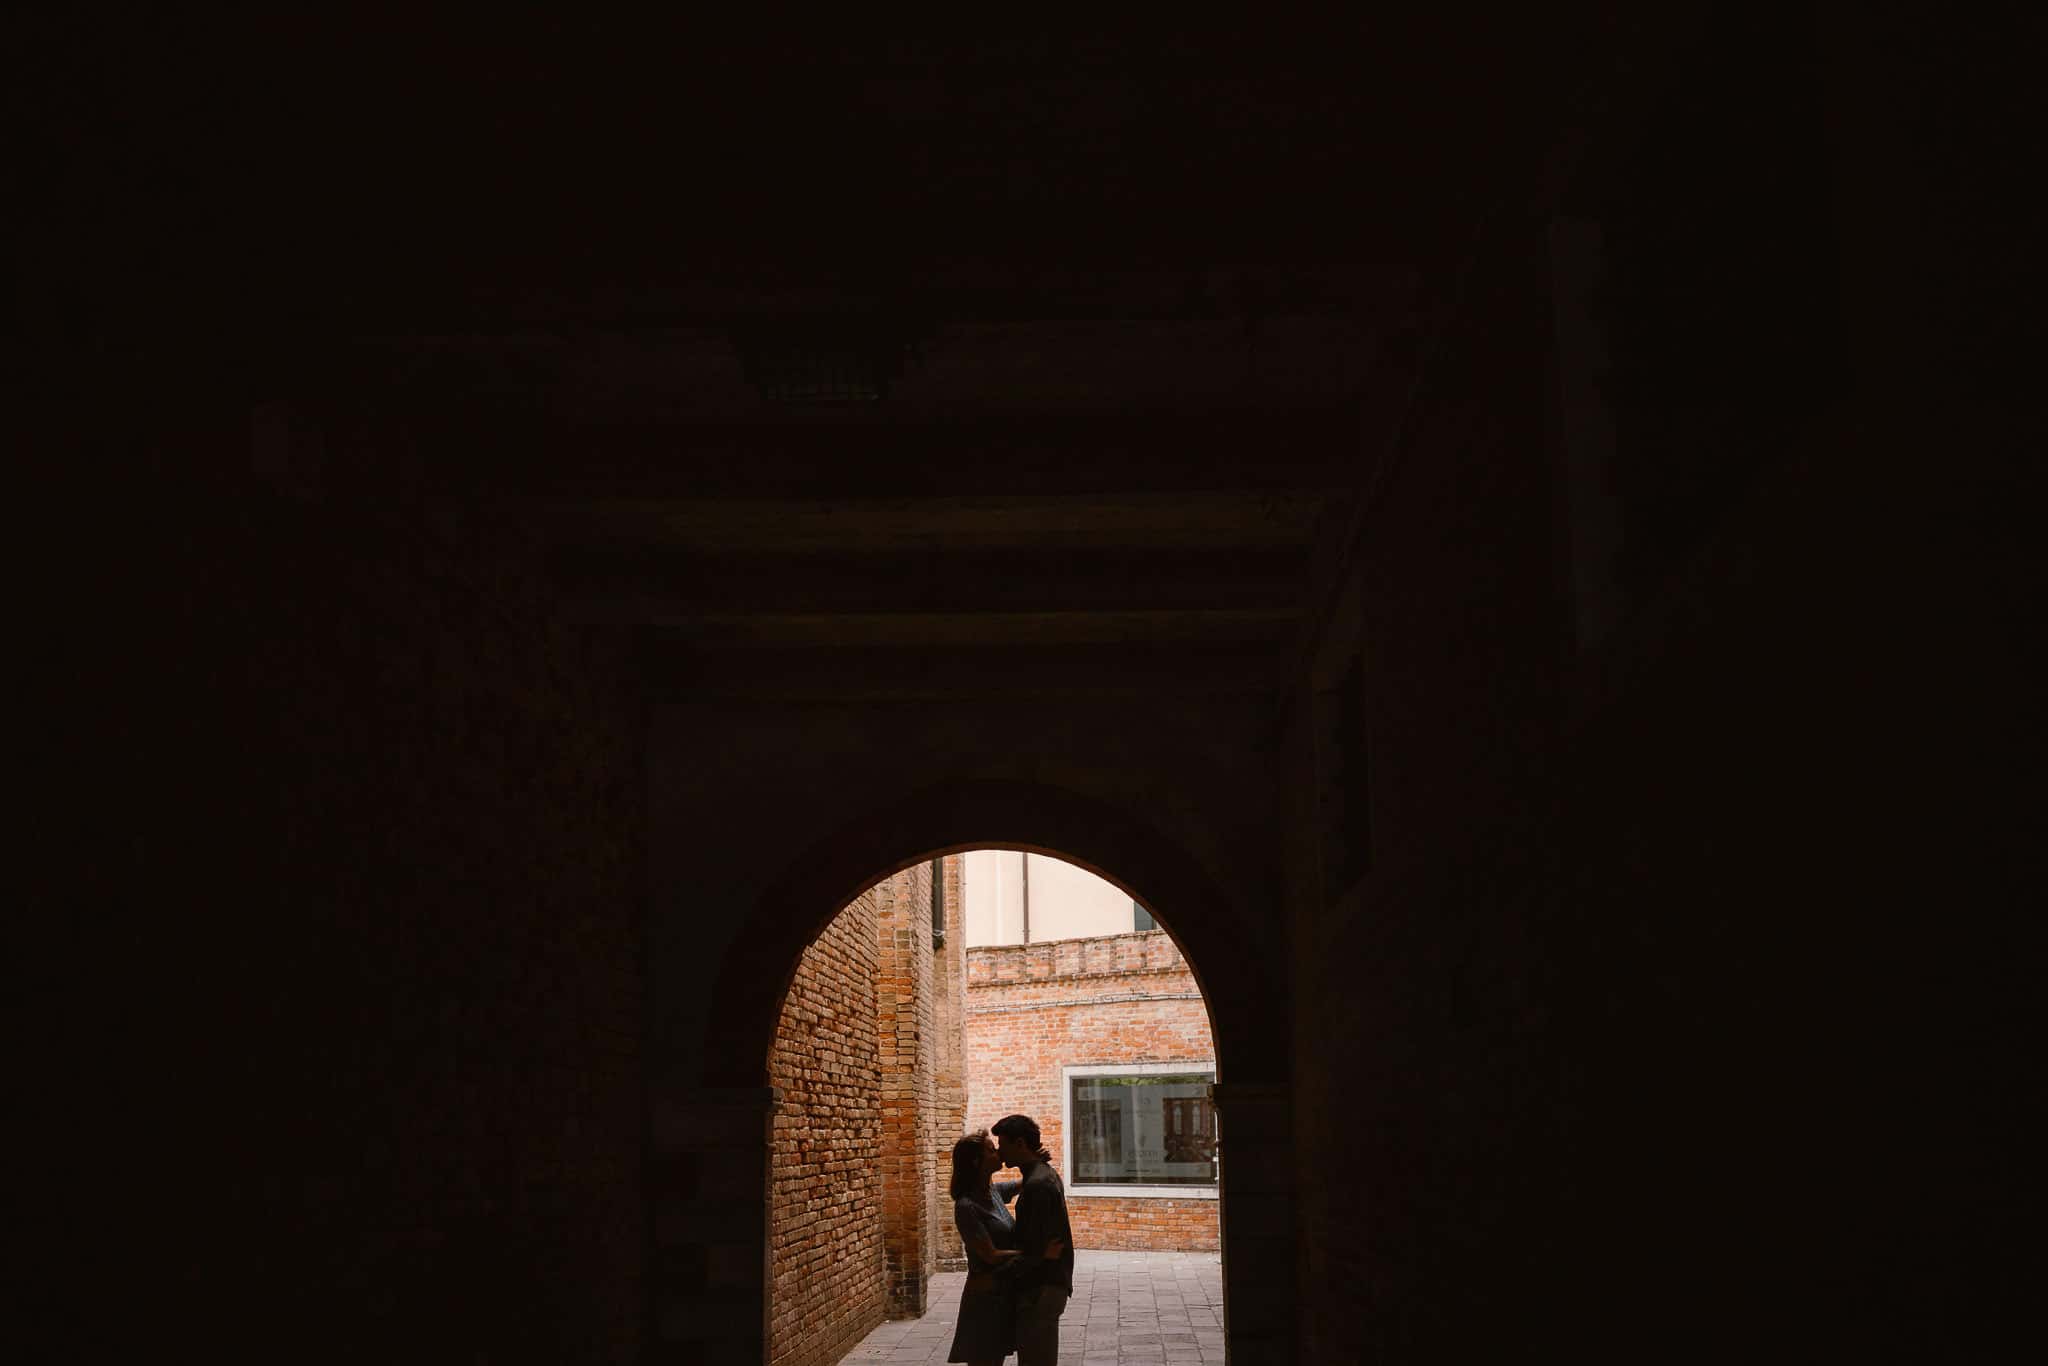 Engagement photo session in the alleys of Venice